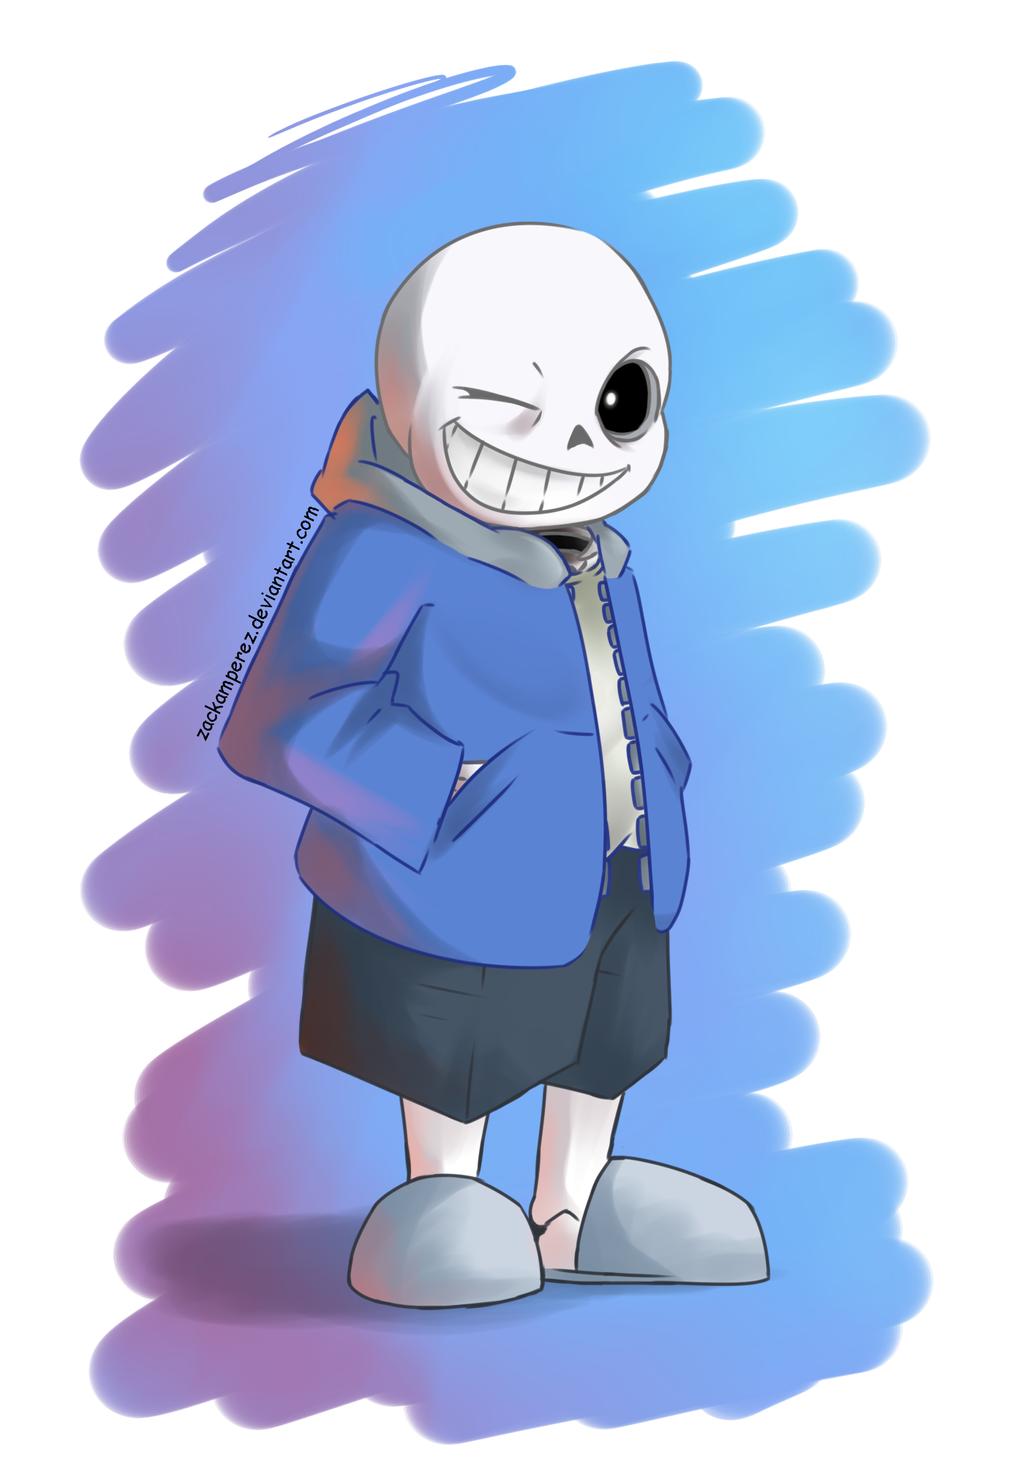 Pictures Of Sans The Skeleton.